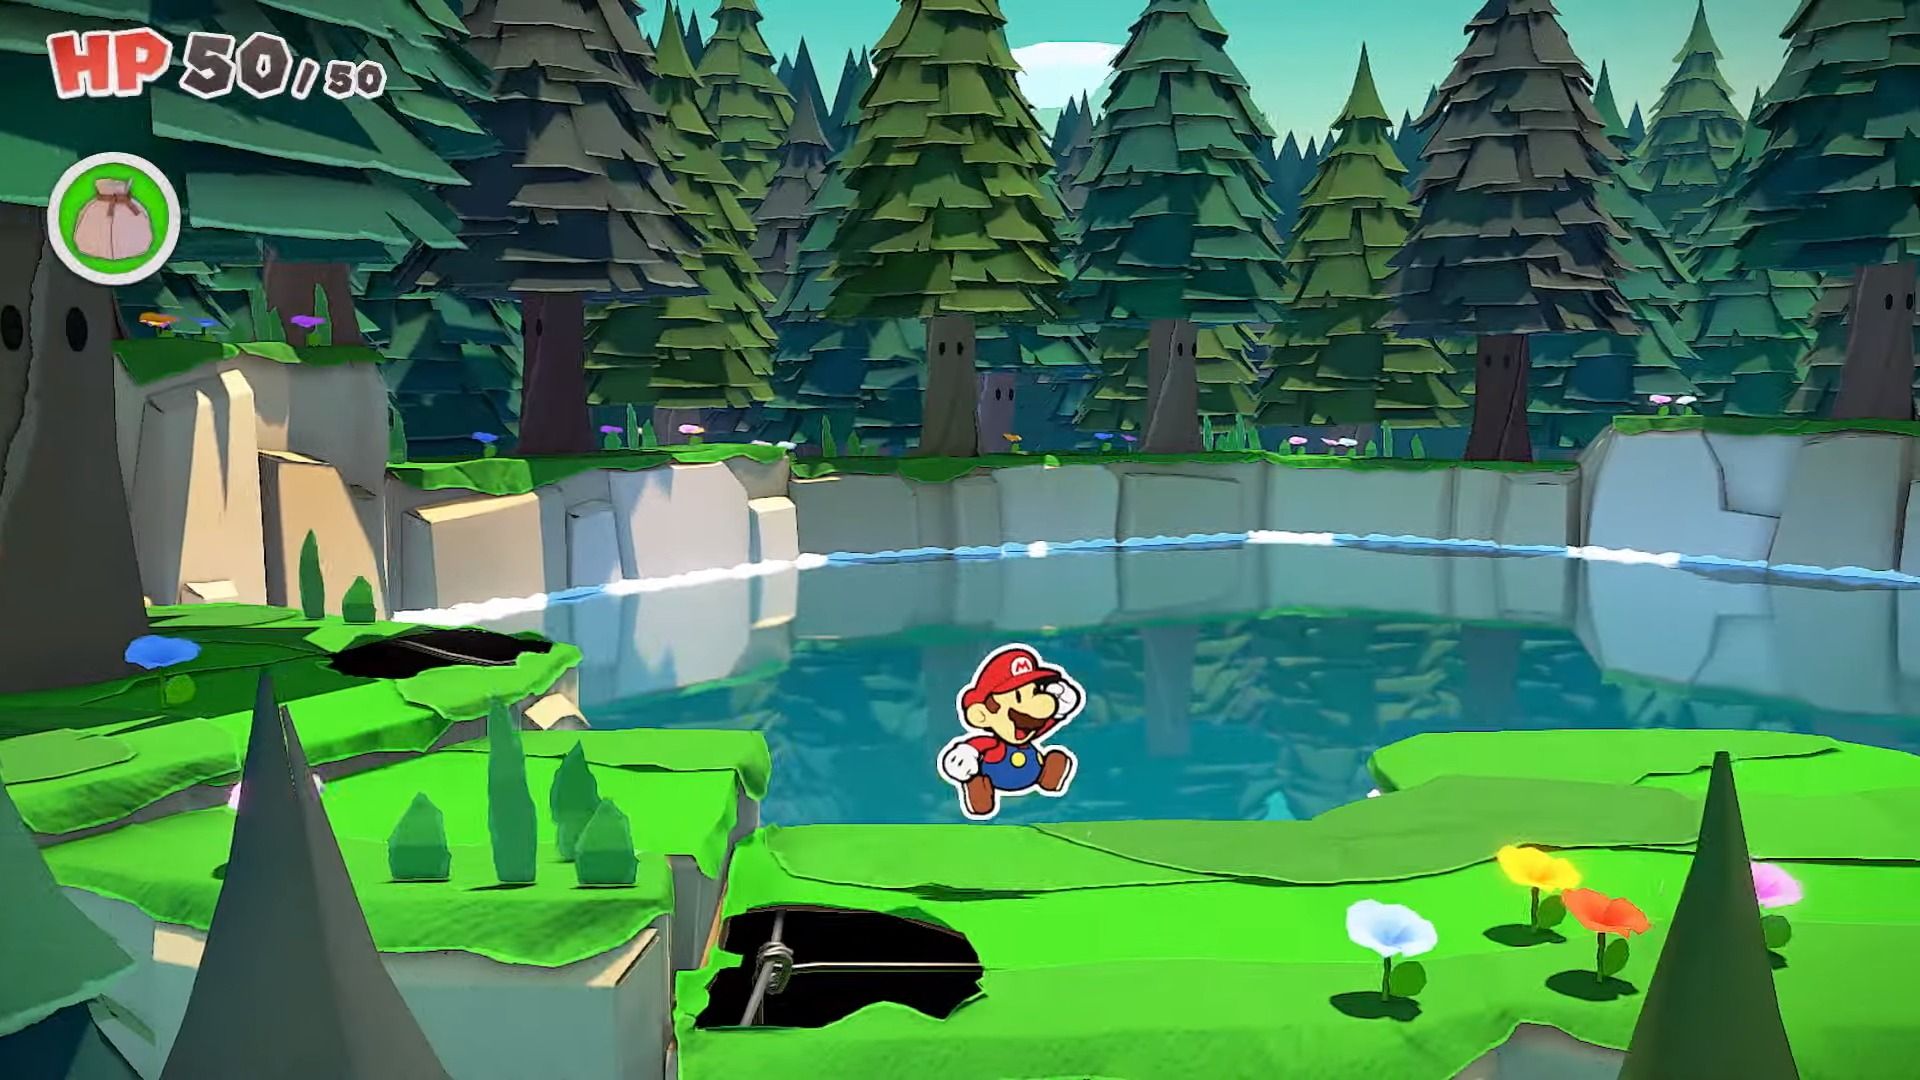 Paper Mario Unfolding On Switch: The Origami King Arrives July 17